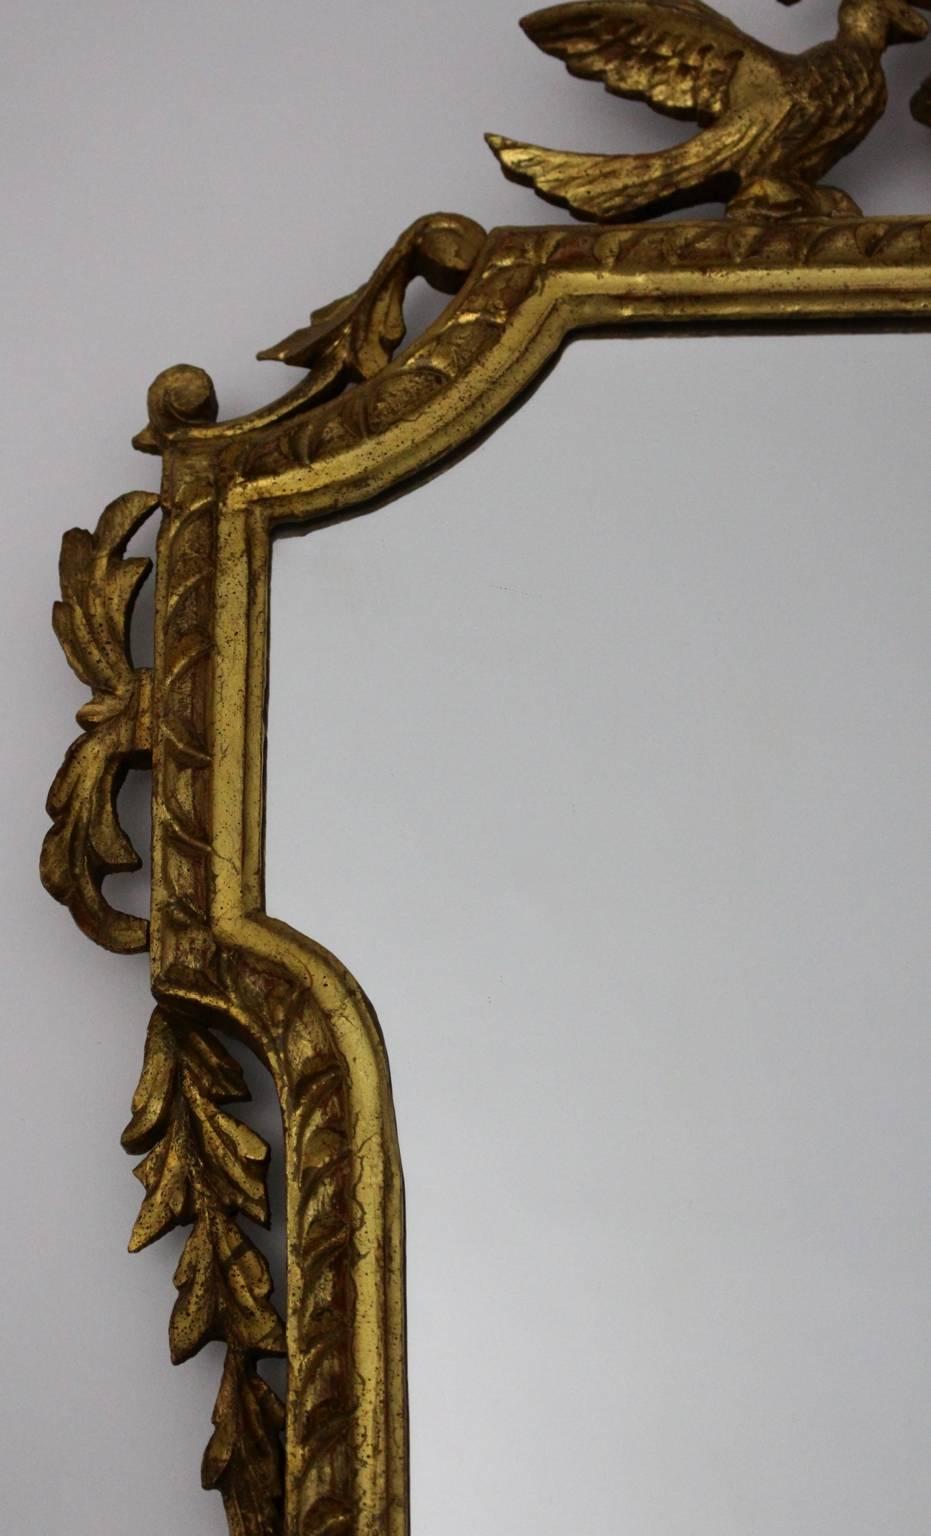 Antique gilt carved wood wall mirror or trumeau mirror Austria circa 1795. 
The high- quality and very decorative gilt wood vintage wall mirror / trumeau mirror shows hand carved birds and vase.
While the antique wall mirror is in good condition